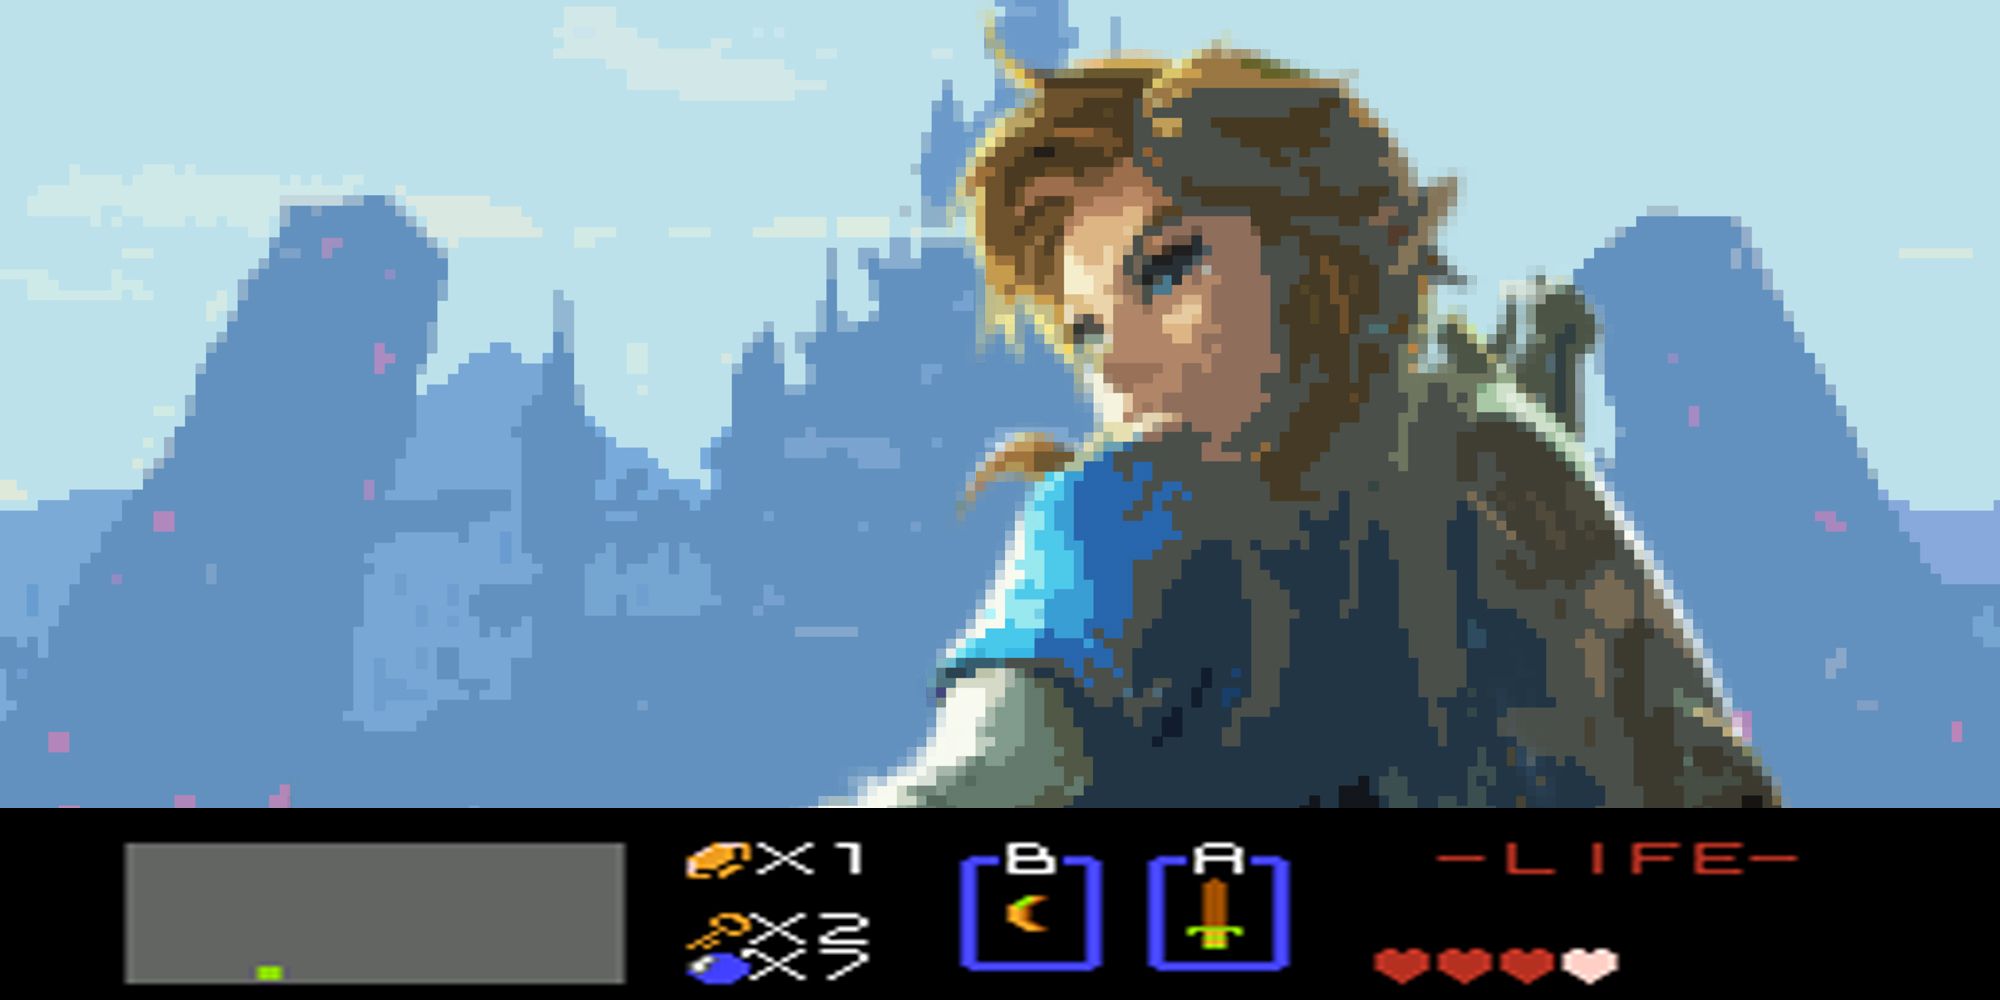 Link from Breath of the Wild but pixelated and with a NES-style Zelda interface at the bottom of the pic